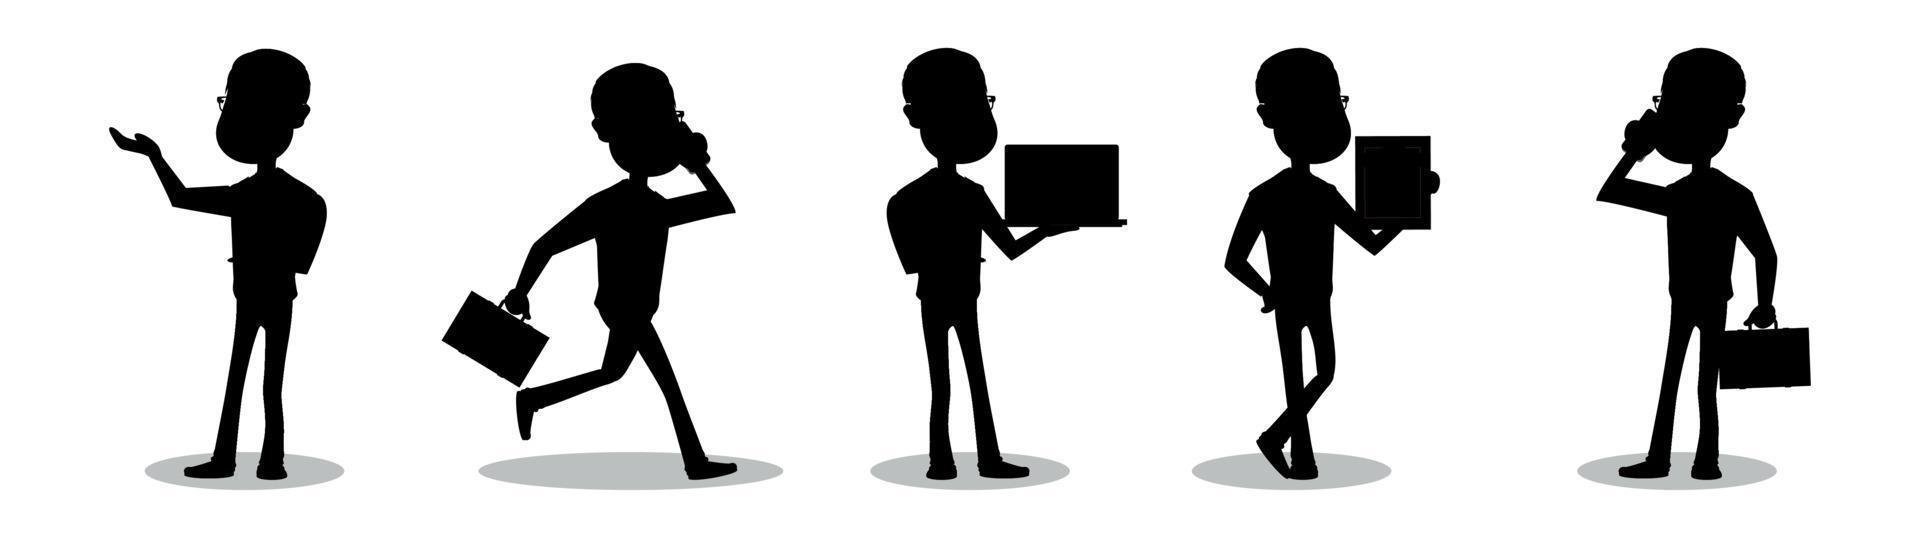 business people silhouettes vector